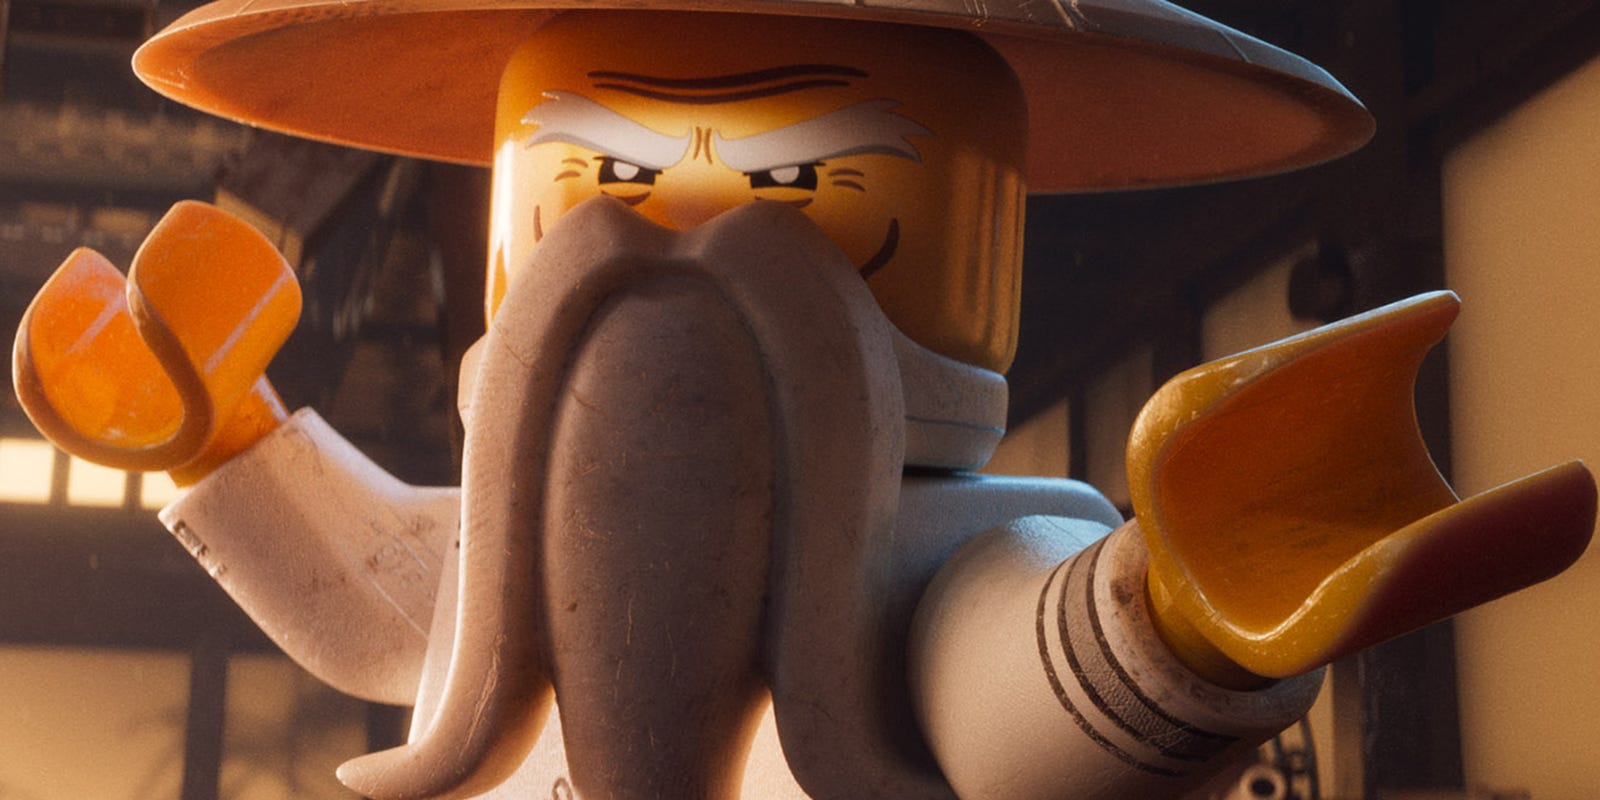 Exclusive sneak peek: 'Master' introduces Jackie Chan from Lego's 'Ninjago'